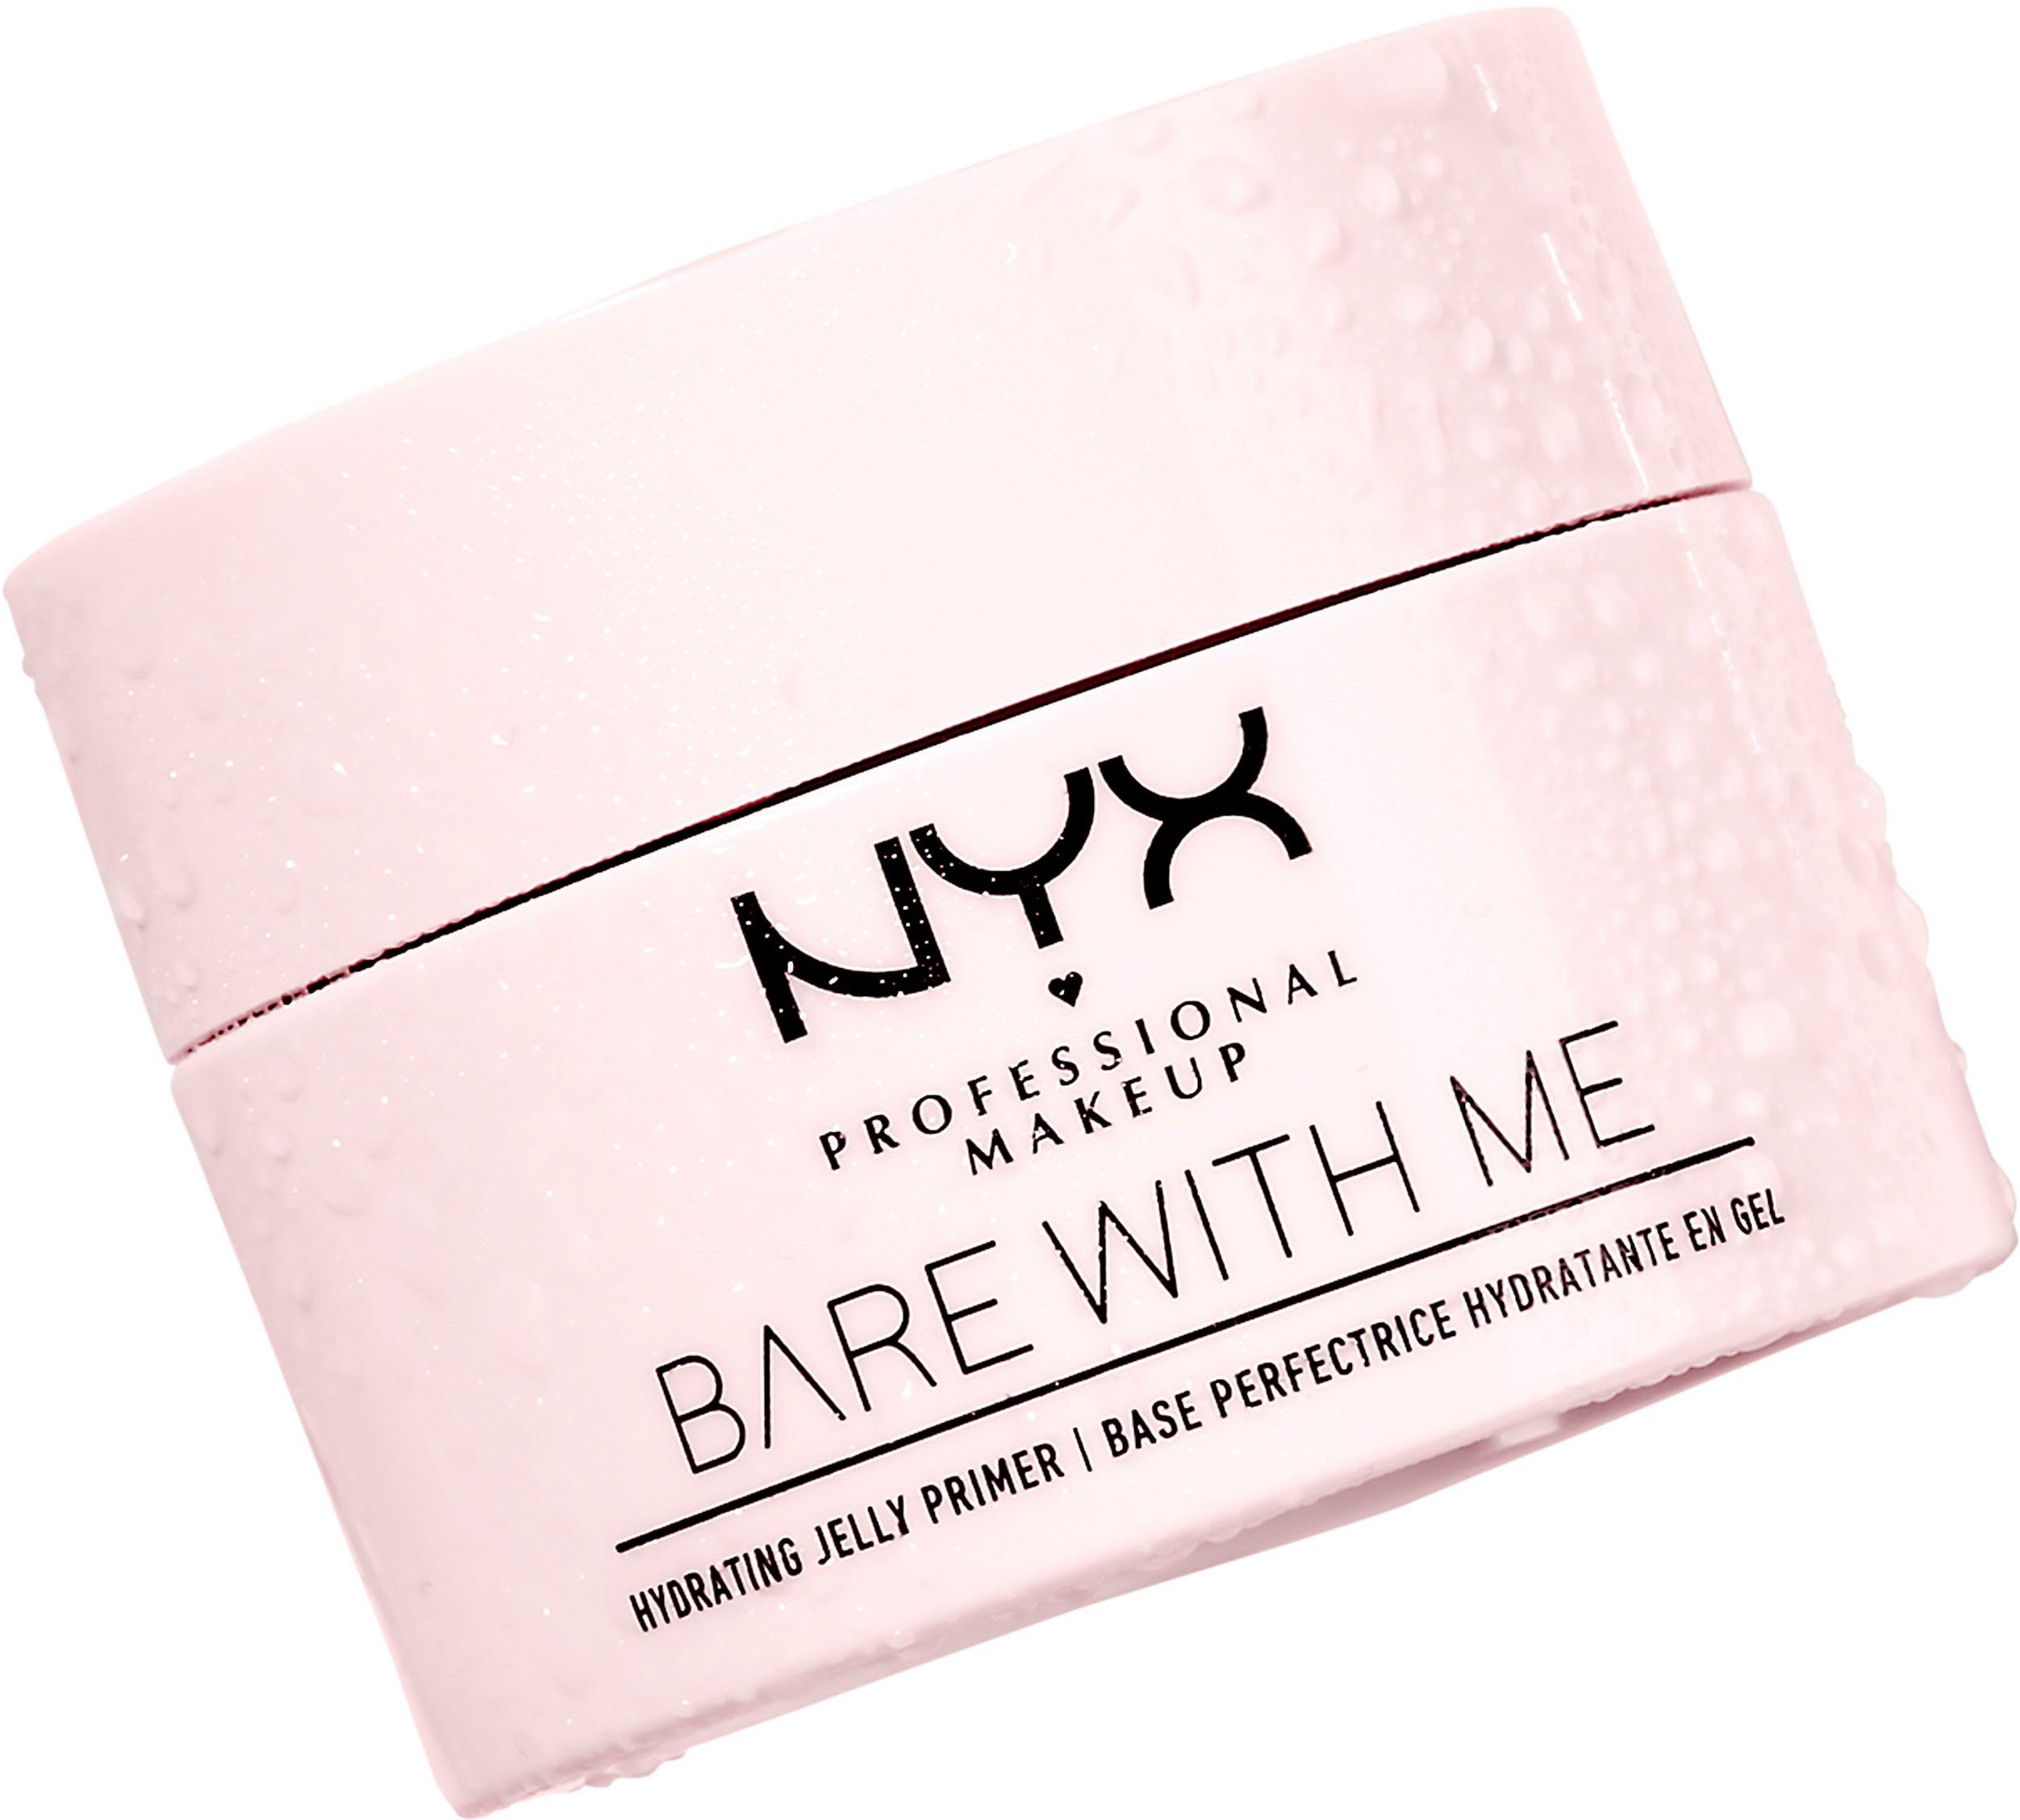 Professional Primer Jelly Makeup Primer NYX With Bare Hydrating Me NYX